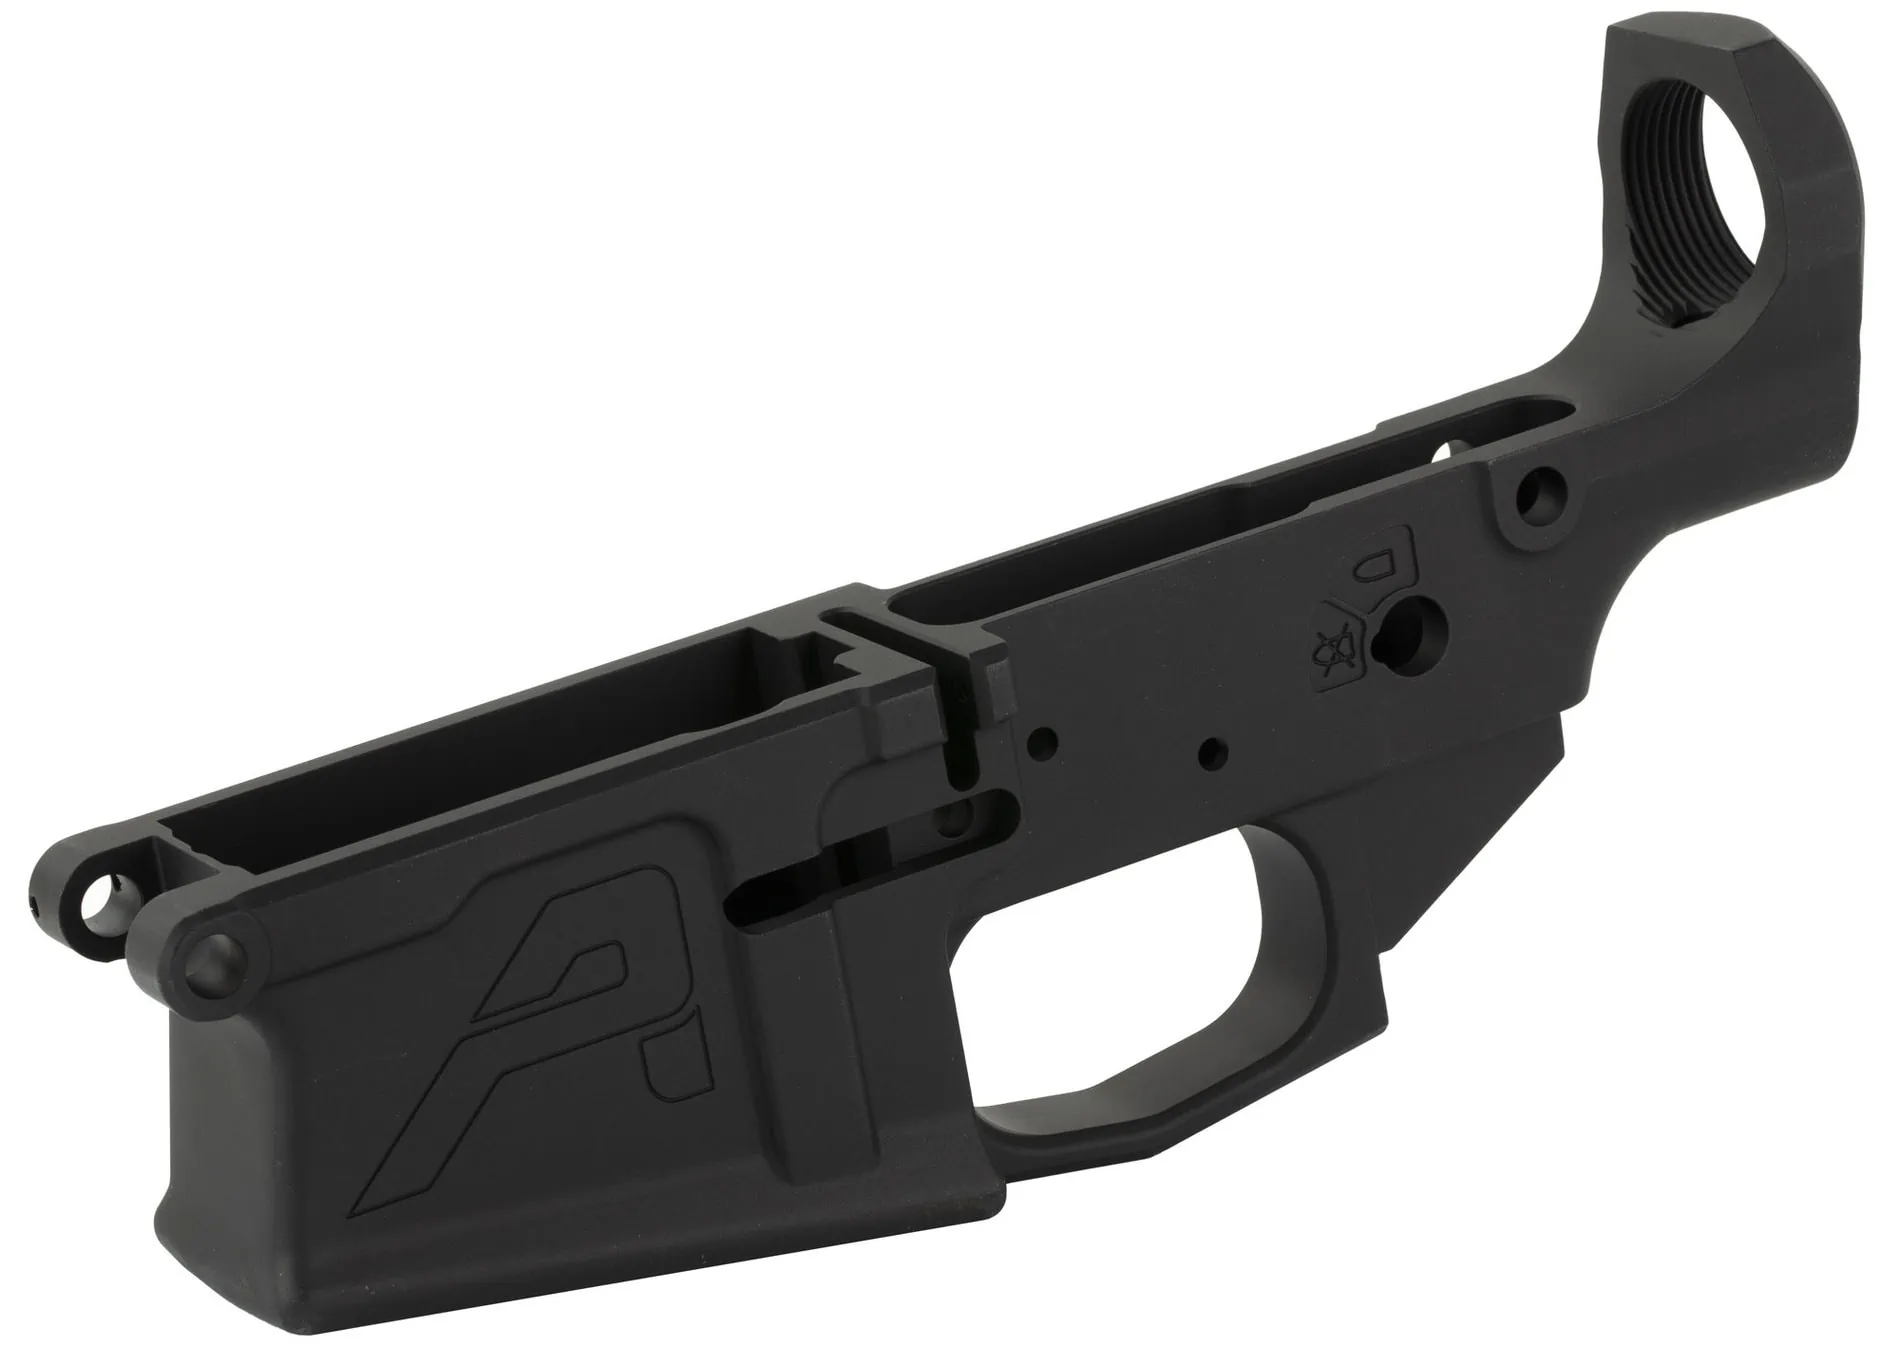 The M5 lower receiver can be used for builds in .308 Winchester and 6.5 Creedmoor